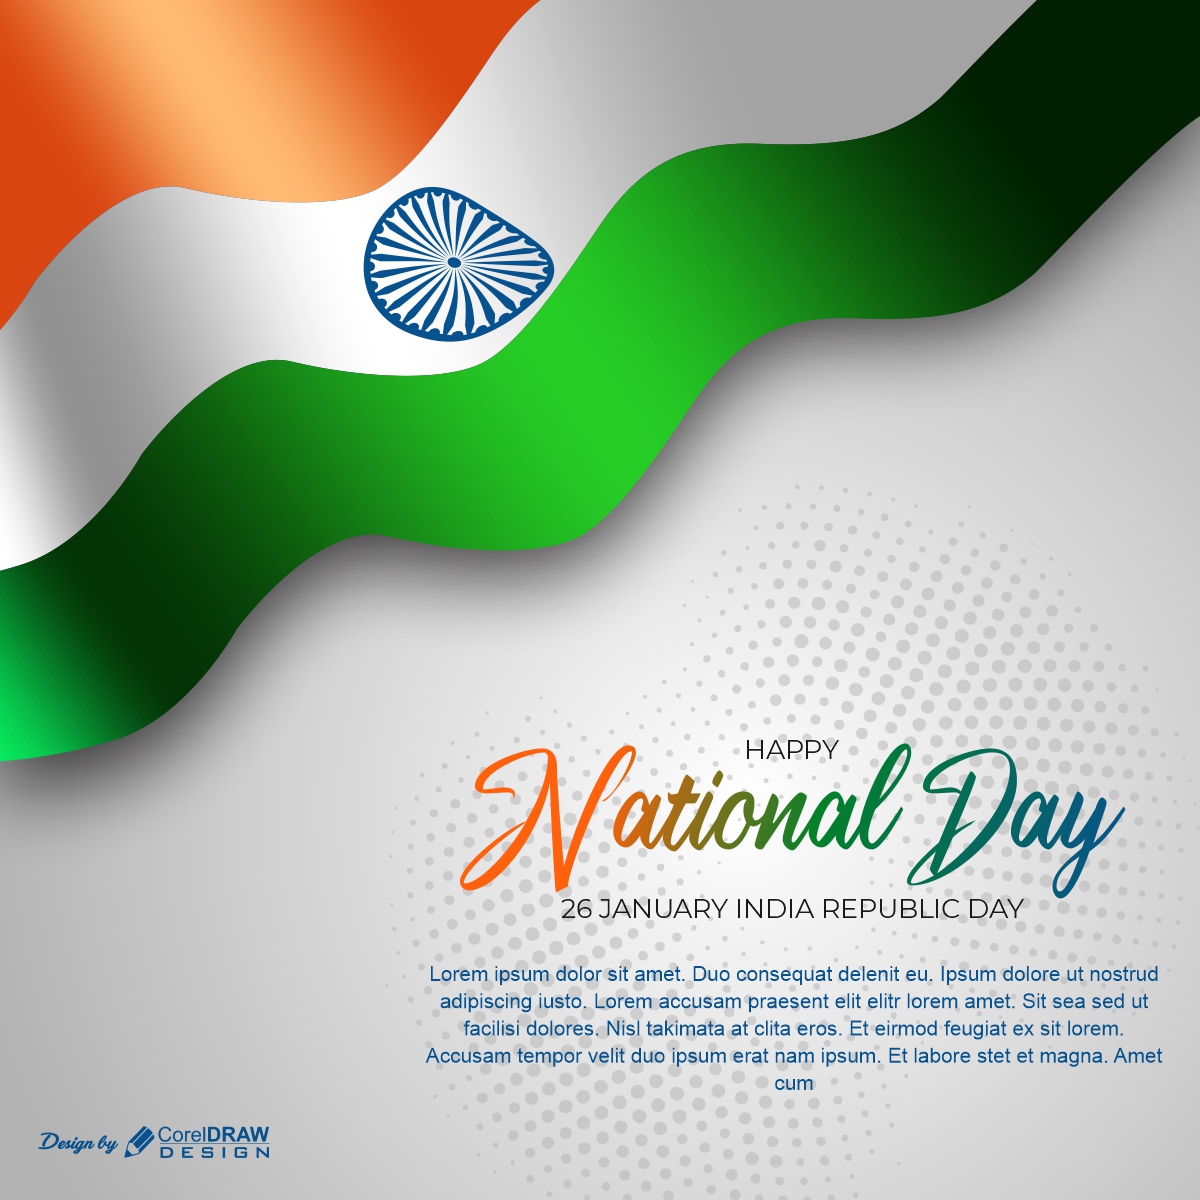 Awesome Indian Flag Design For Happy Republic Day Vector